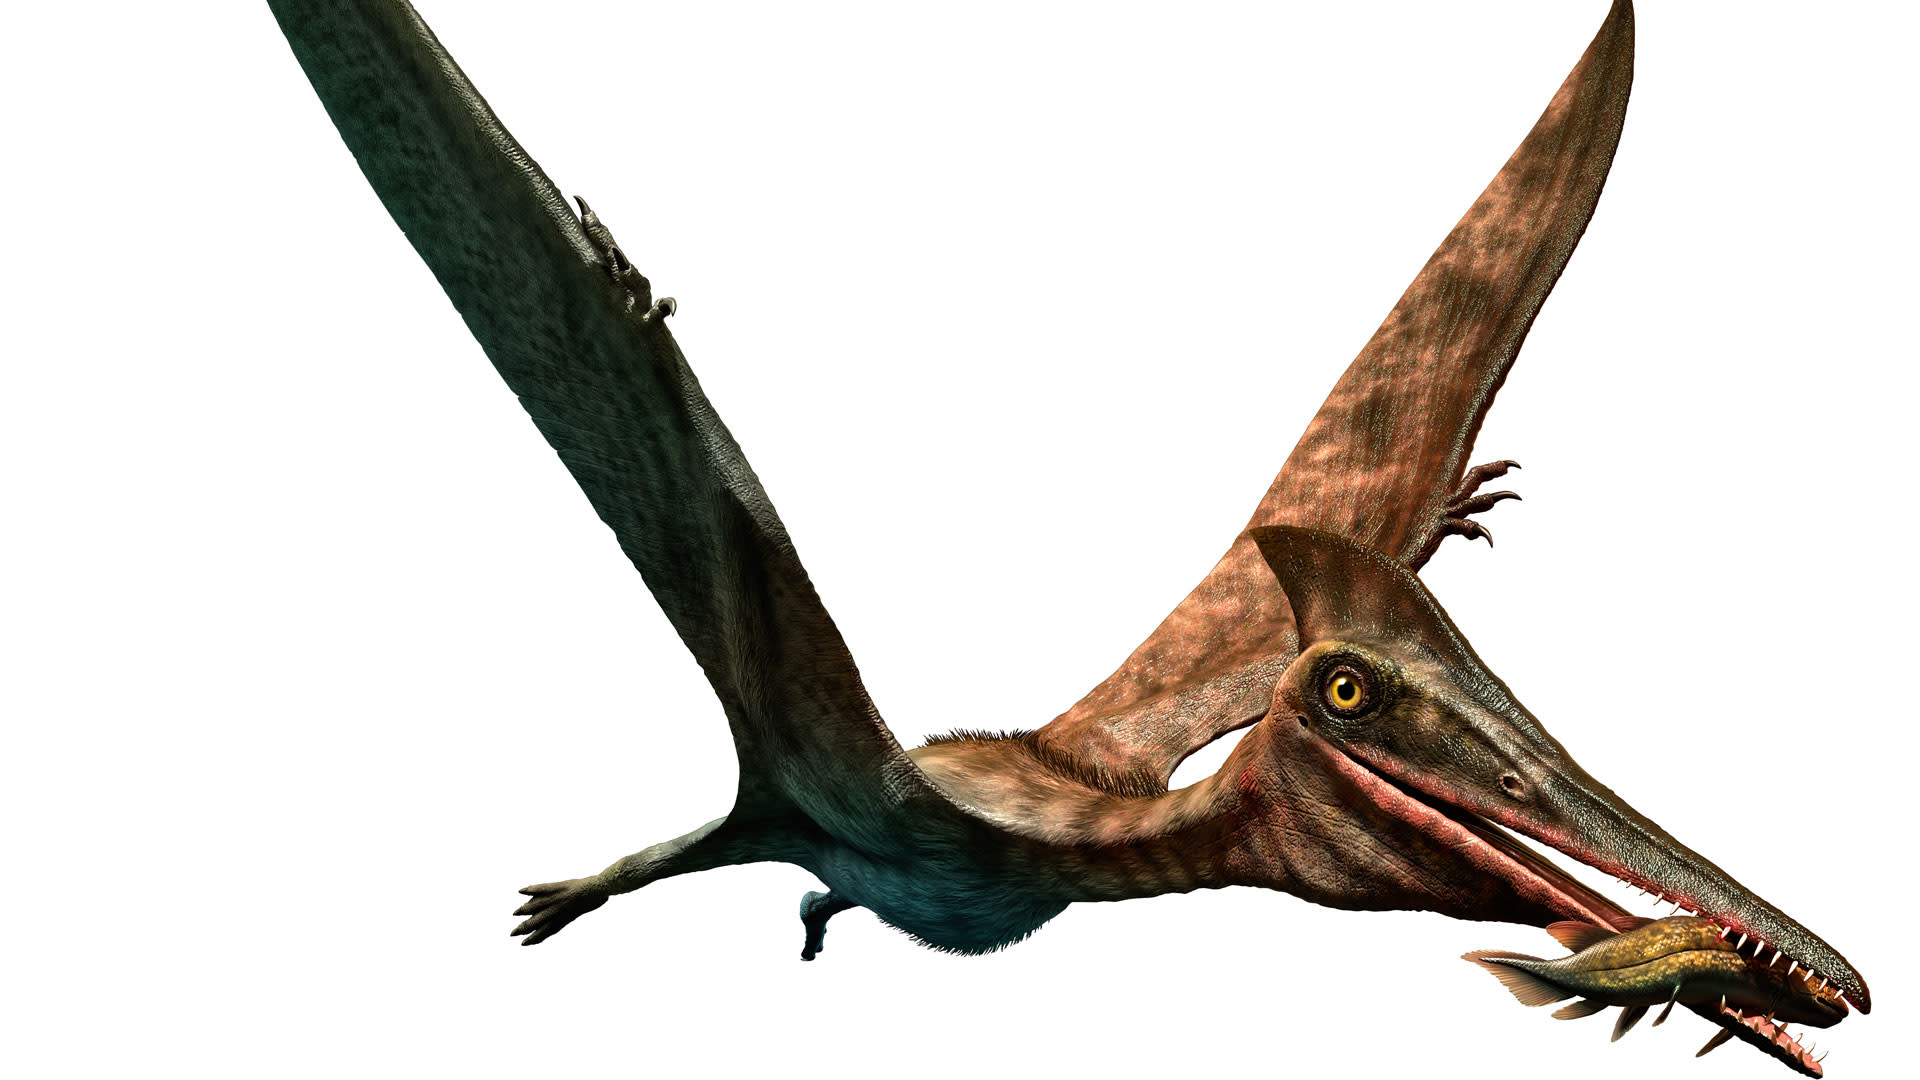 Researchers say the largest flying creature in history had a neck longer than a giraffe